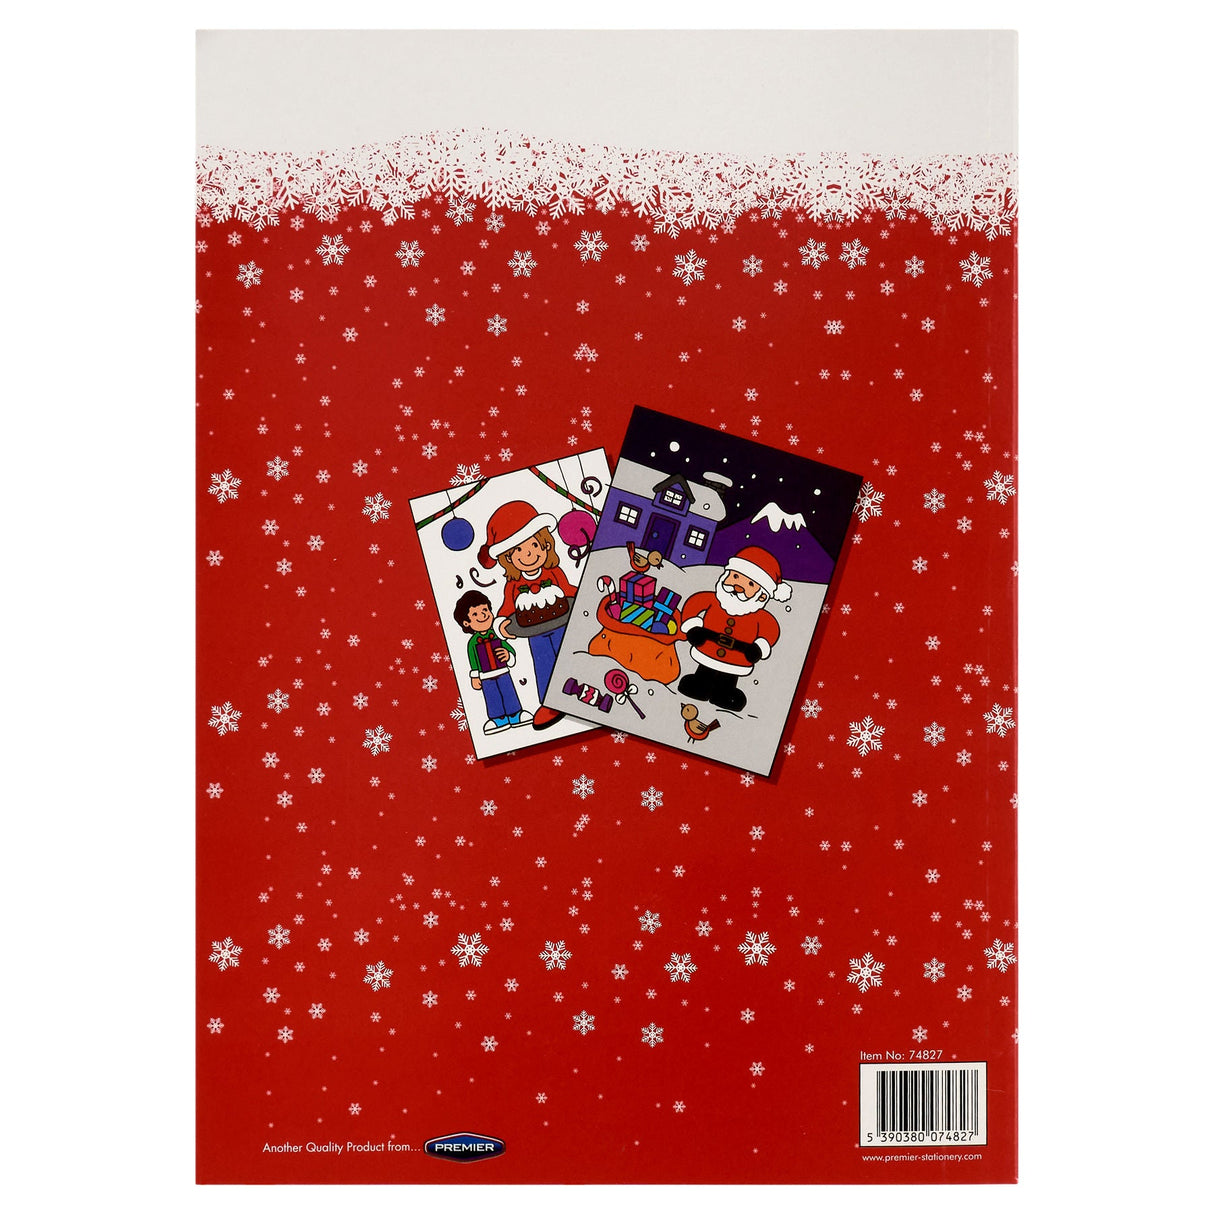 World of Colour A4 Perforated Colouring Book - Festive Fun - 96 Pages - Christmas | Stationery Shop UK